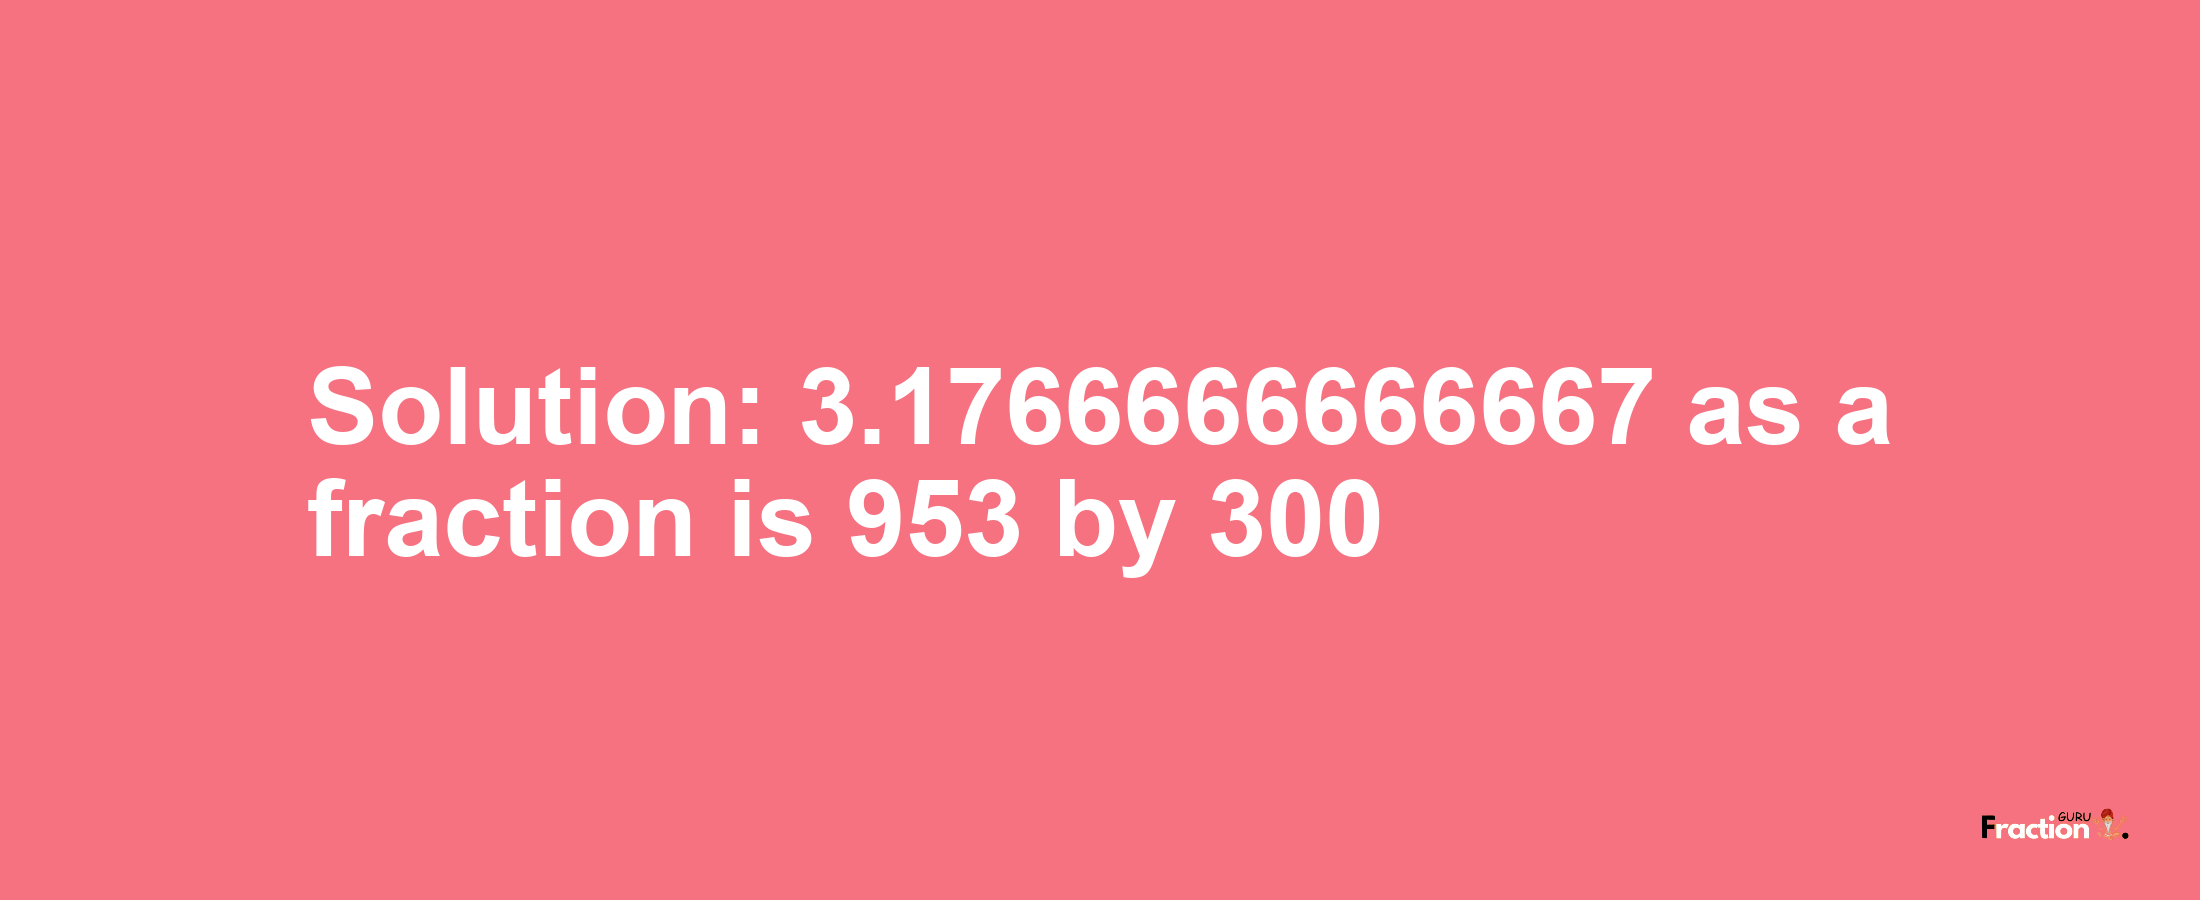 Solution:3.1766666666667 as a fraction is 953/300